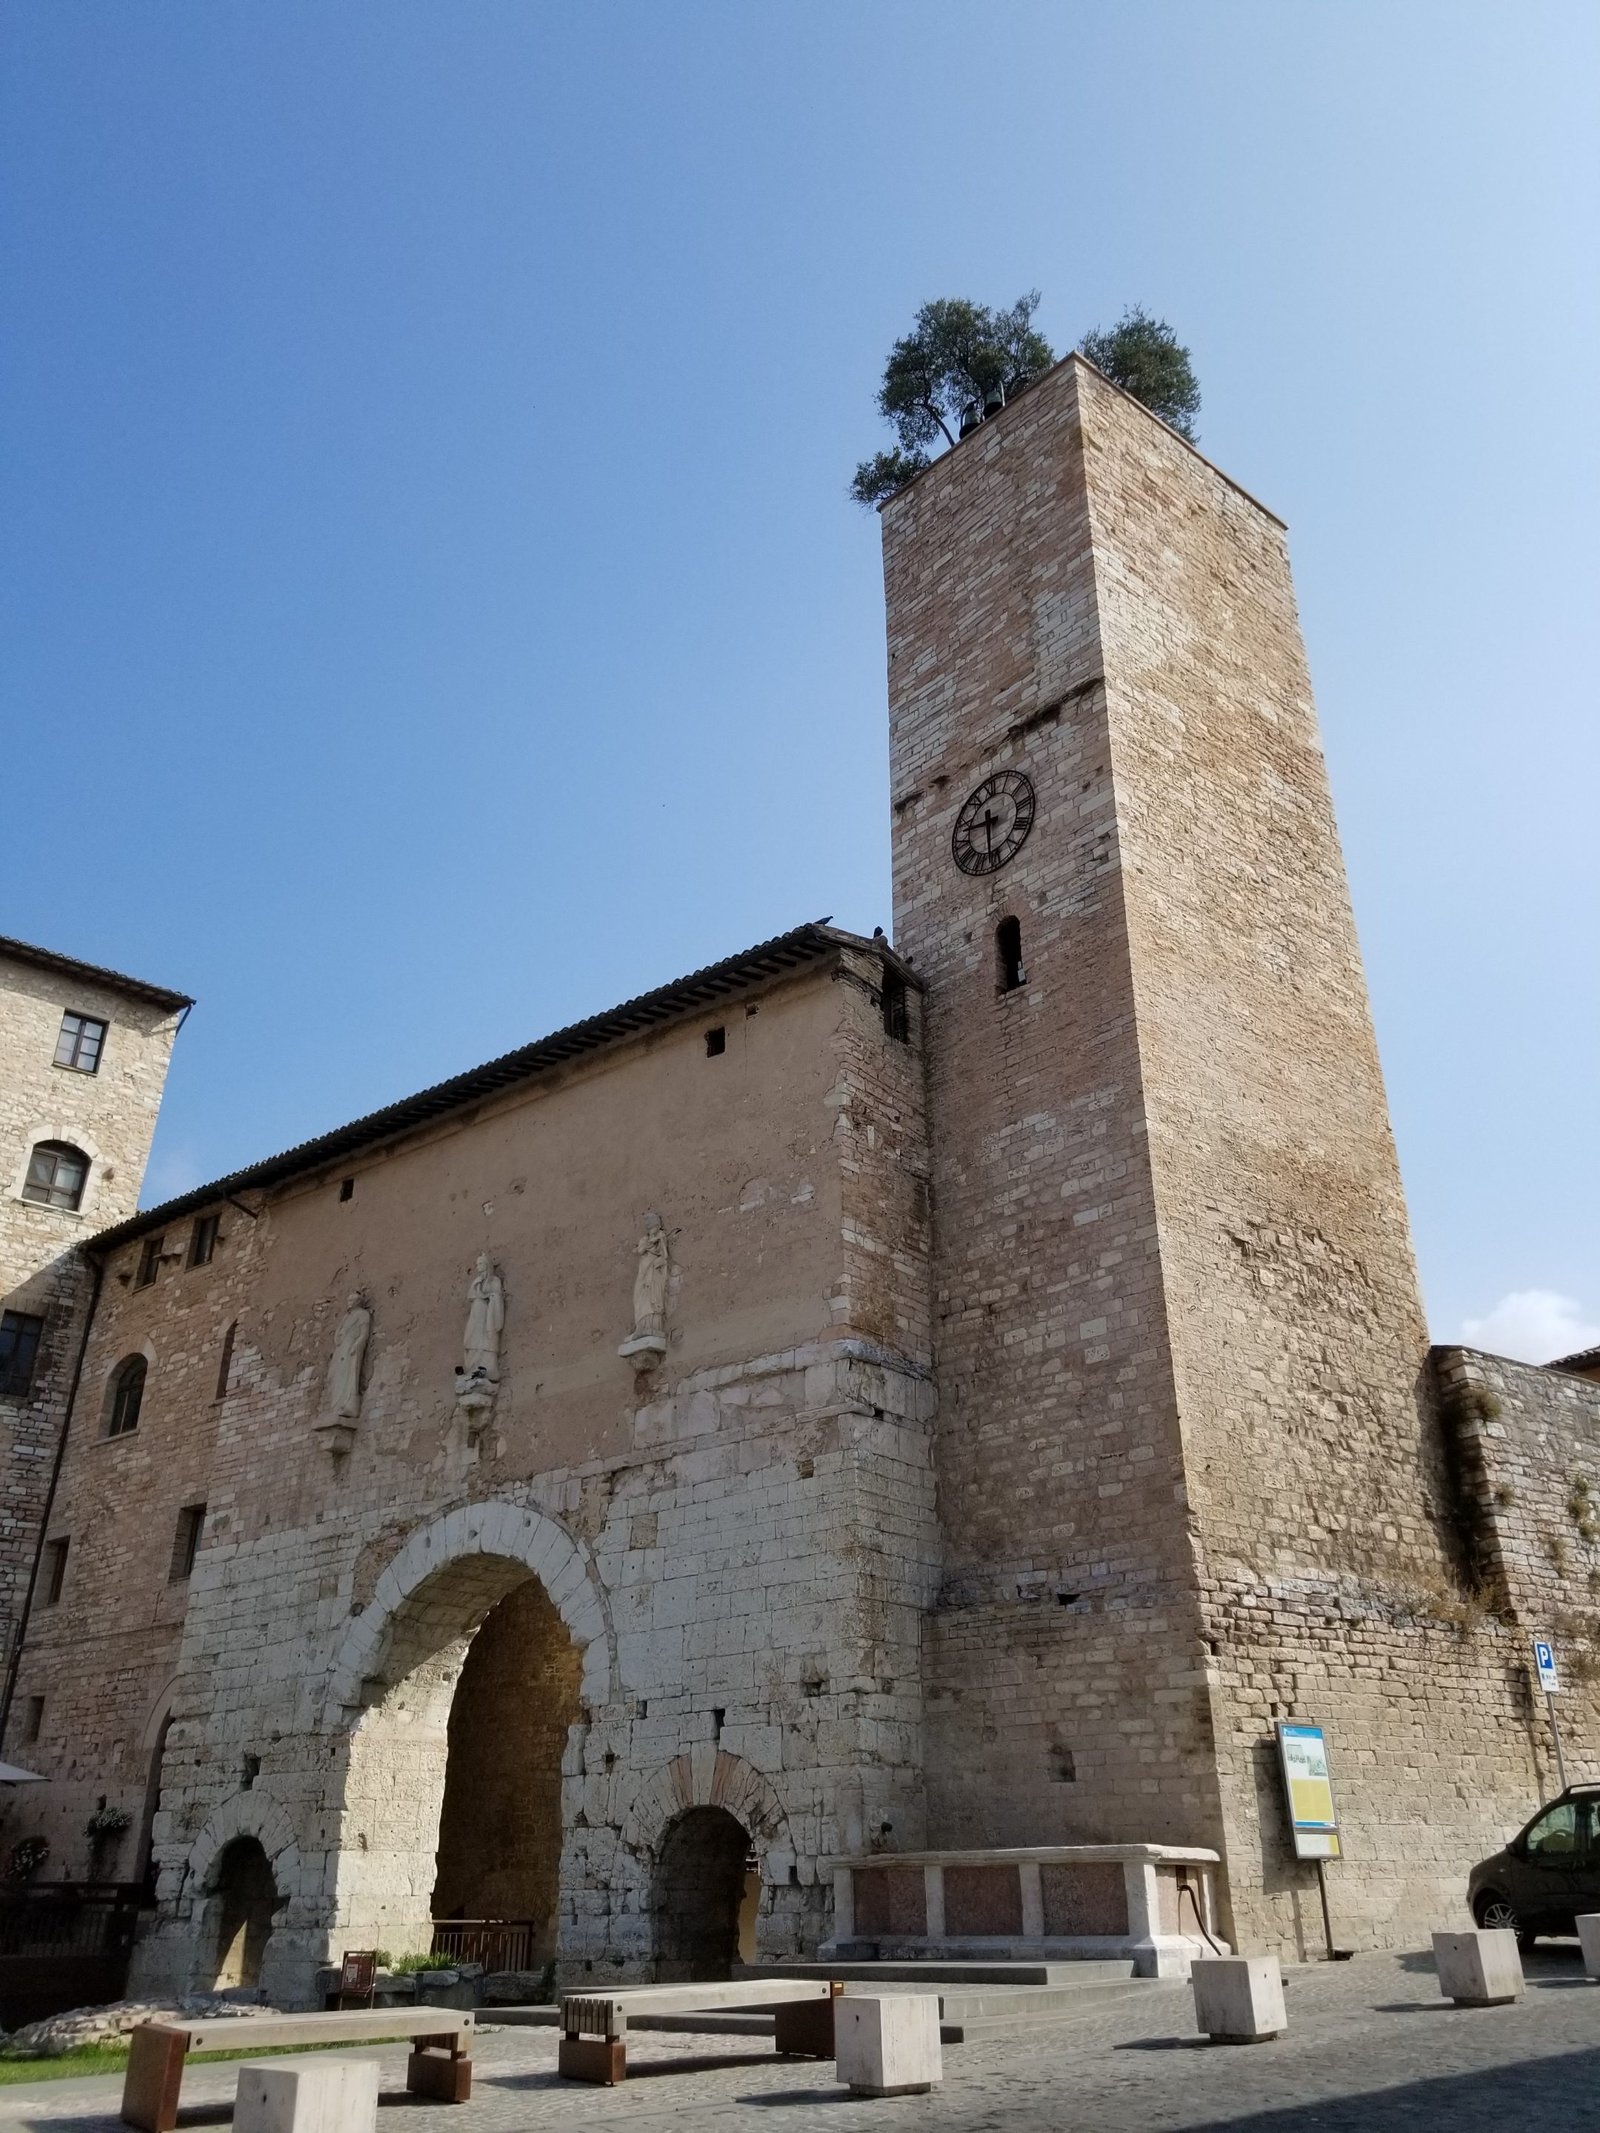 Spello is one of the most beautiful towns in Italy. The flower balconies and streets are a photographers dream. Corpus Domini, https://www.ouritalianjourney.com/spello-one-of-the-most-beautiful-towns-in-italy